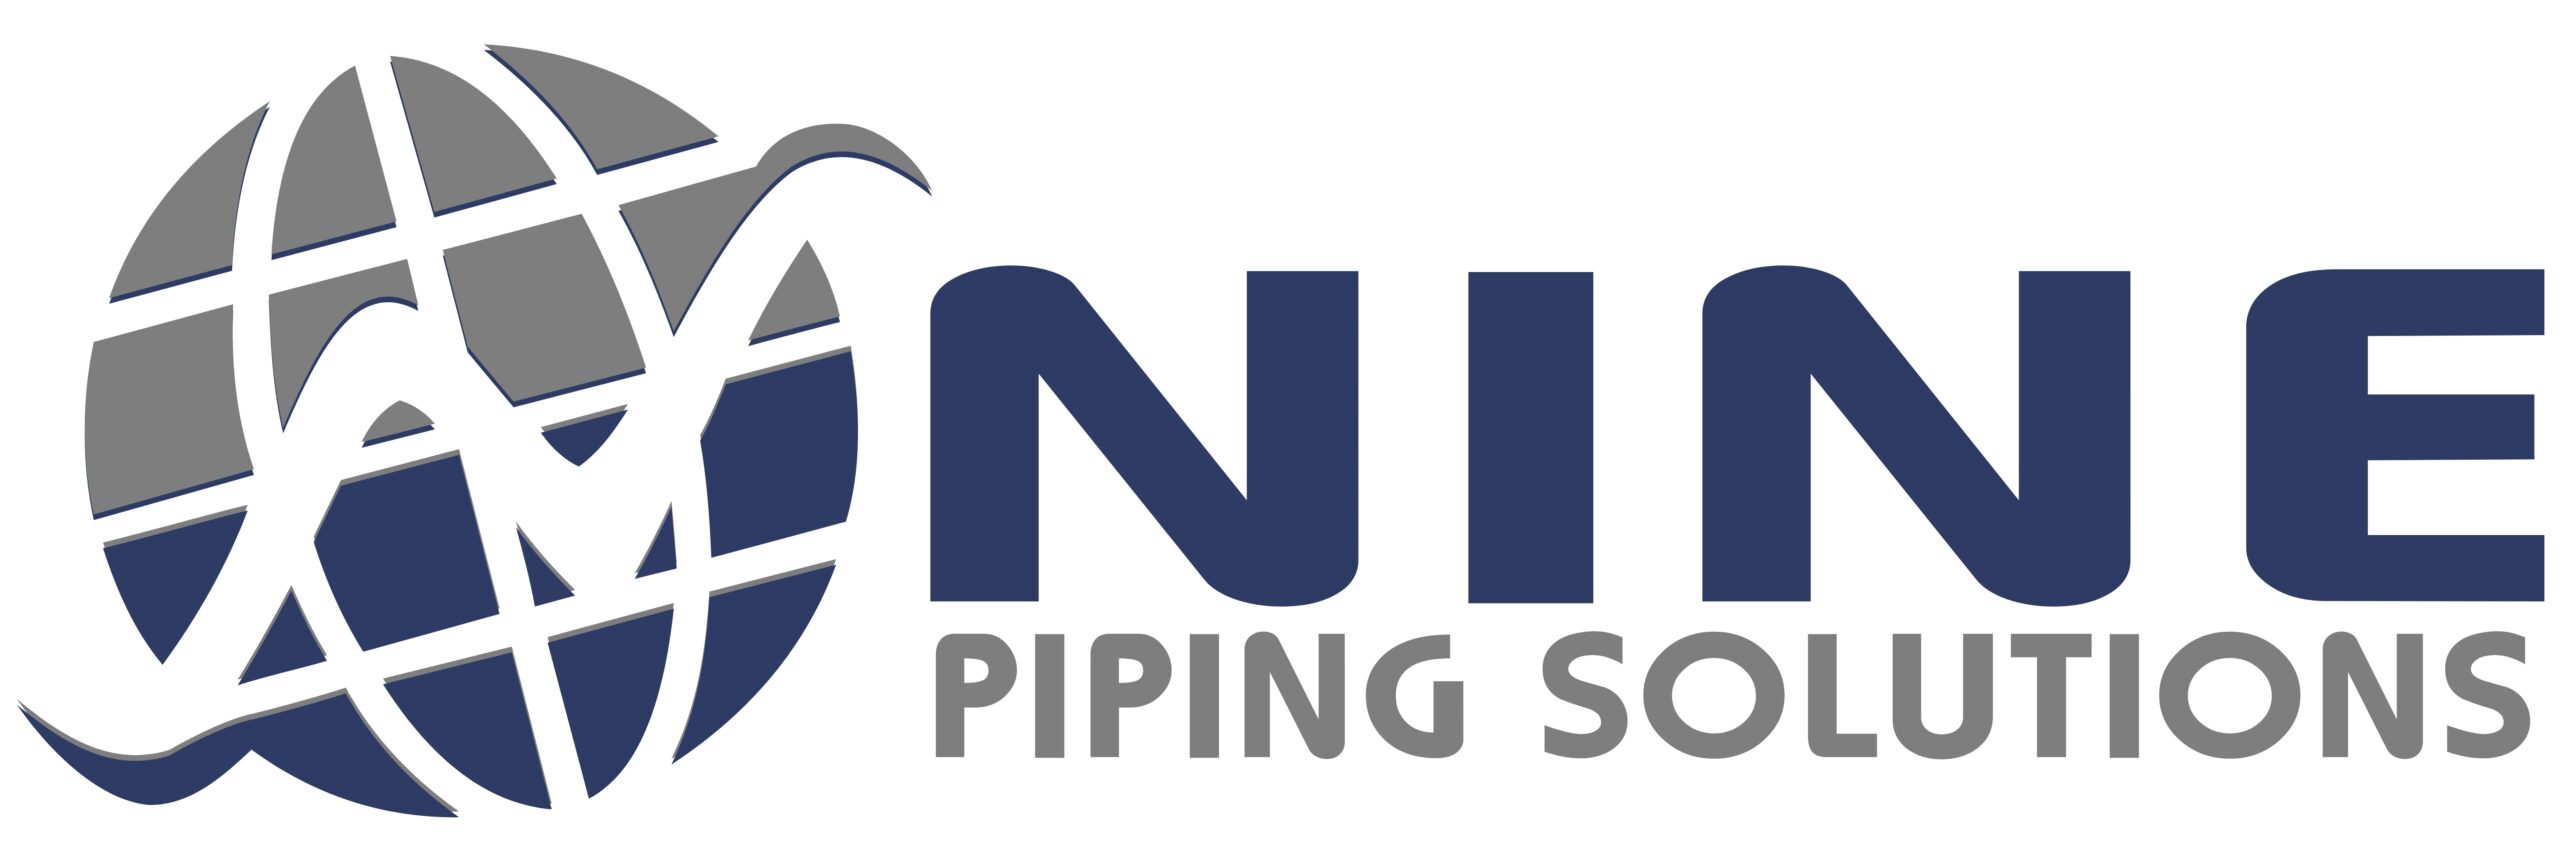 Nine Piping Solutions